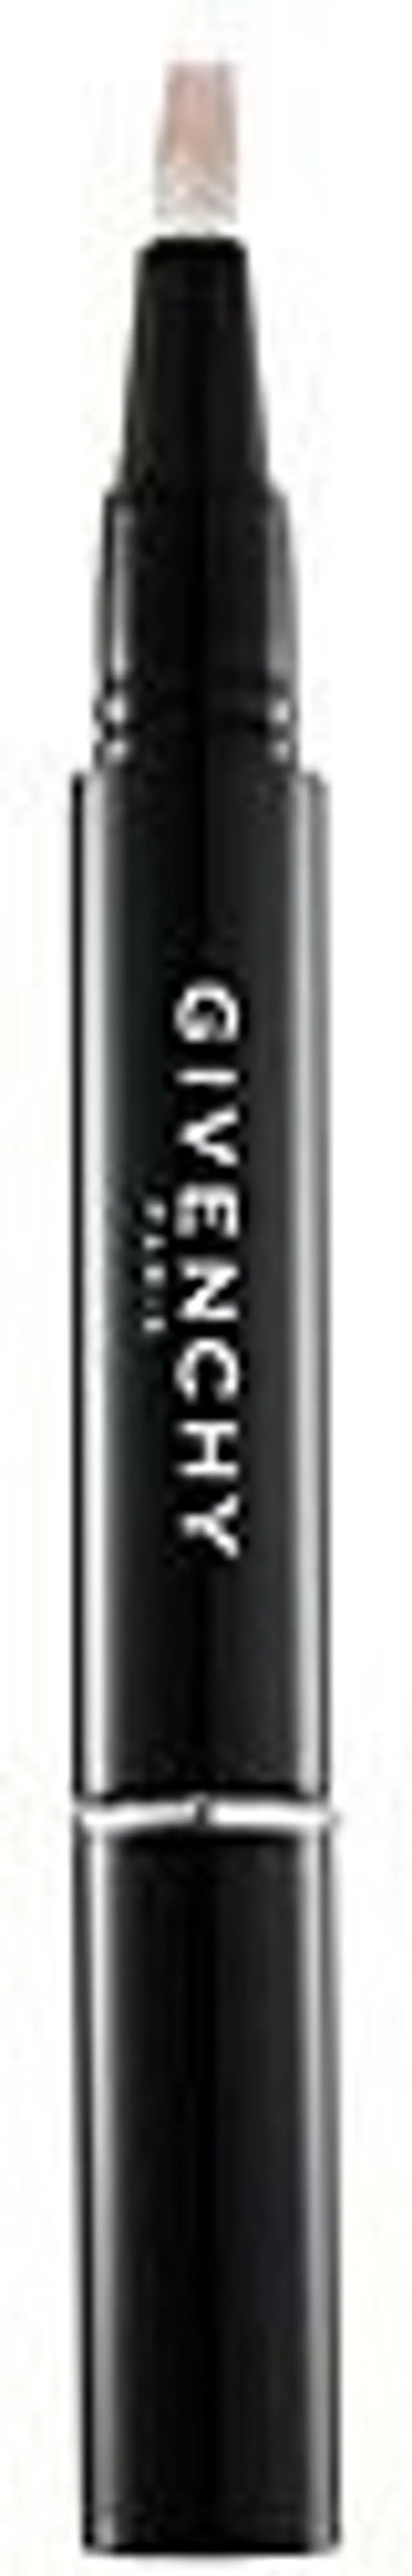 Givenchy Mister Bright Touch of Light Pen